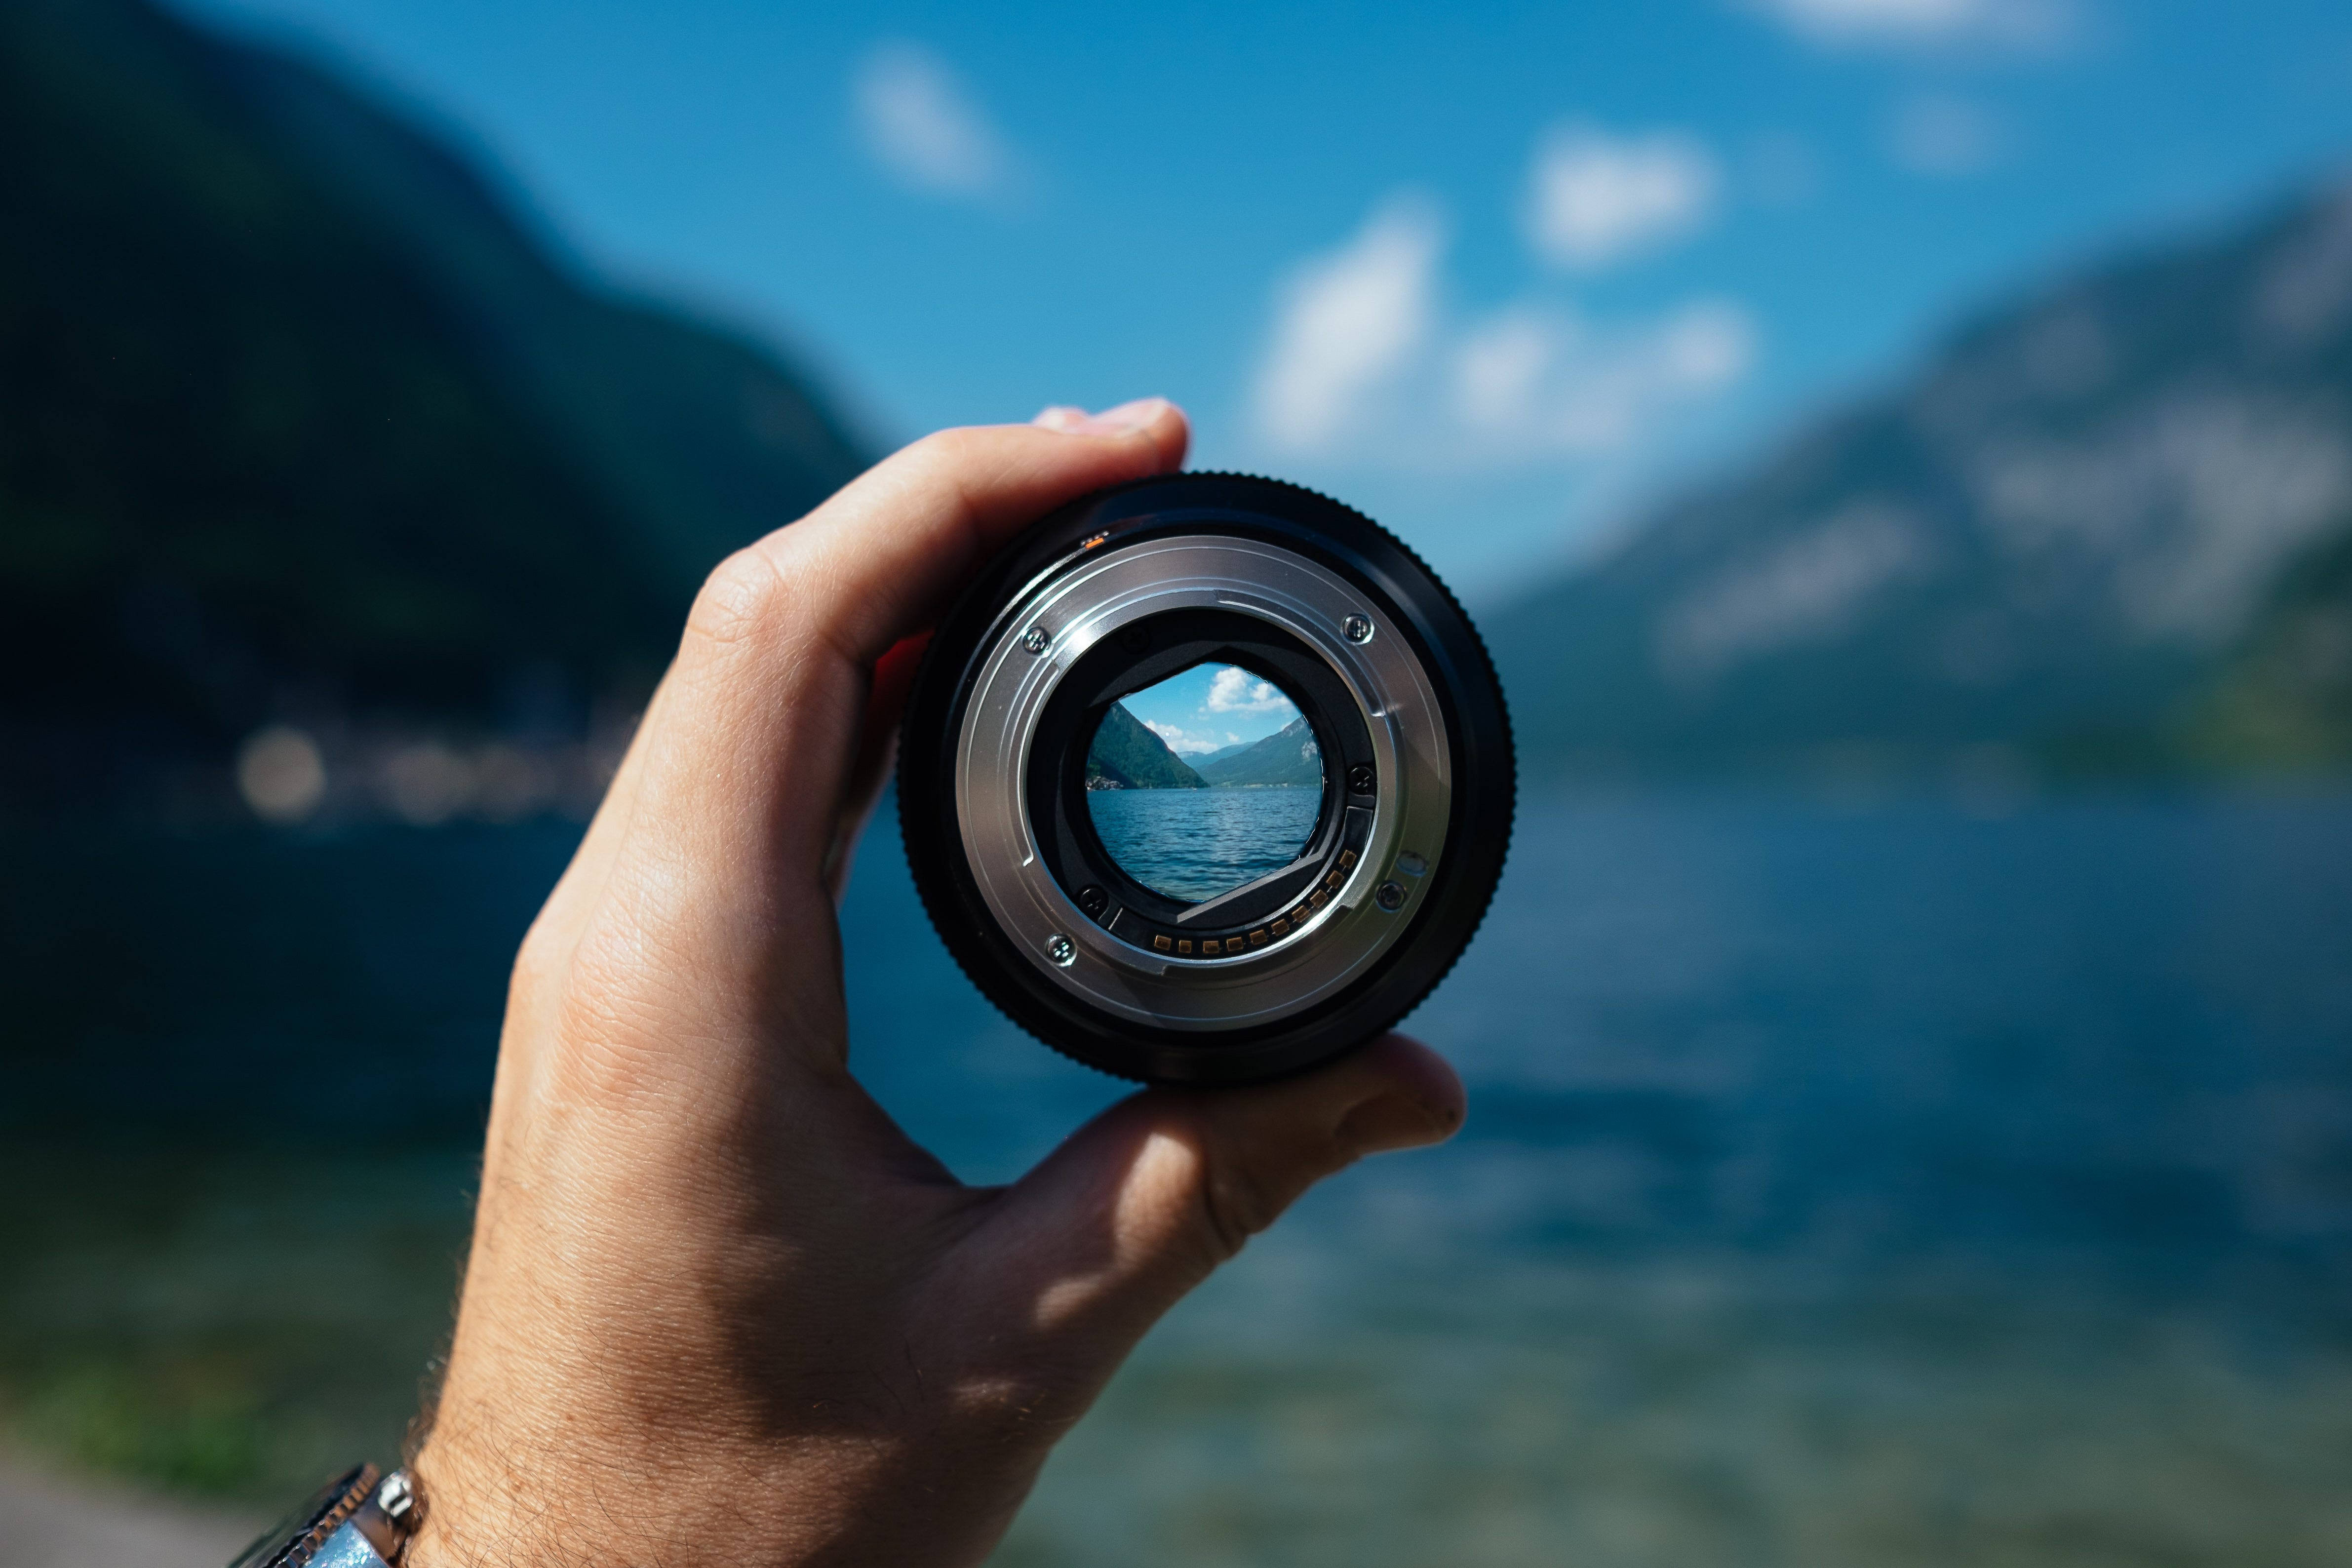 “A person&rsquo;s hand holding a camera lens over a mountain lake” by <a href="https://unsplash.com/@pawelskor?utm_source=medium&amp;utm_medium=referral">Paul Skorupskas</a> on <a href="https://unsplash.com?utm_source=medium&amp;utm_medium=referral">Unsplash</a>